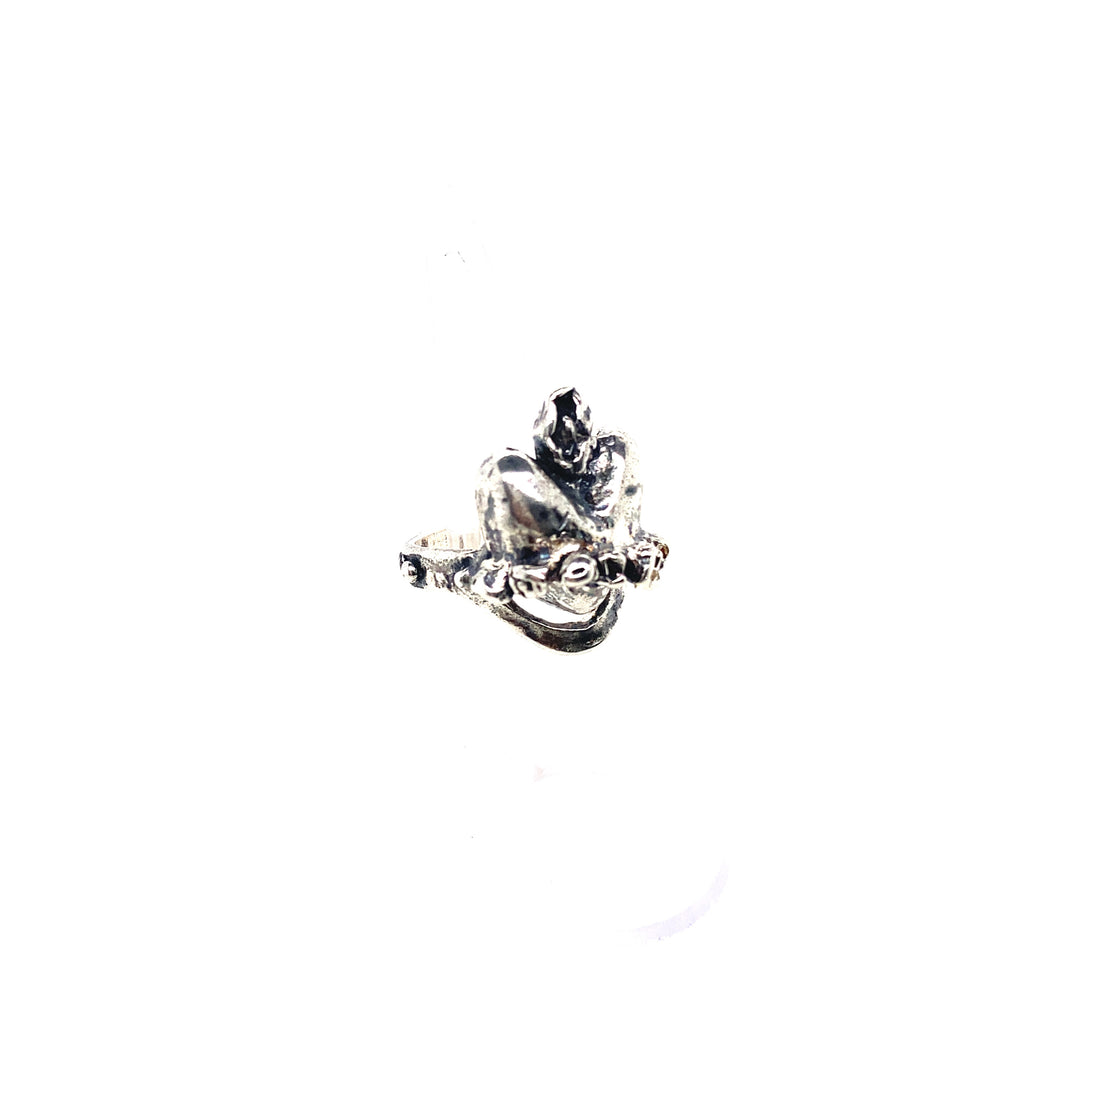 Elassaad Heart and Roses Ring